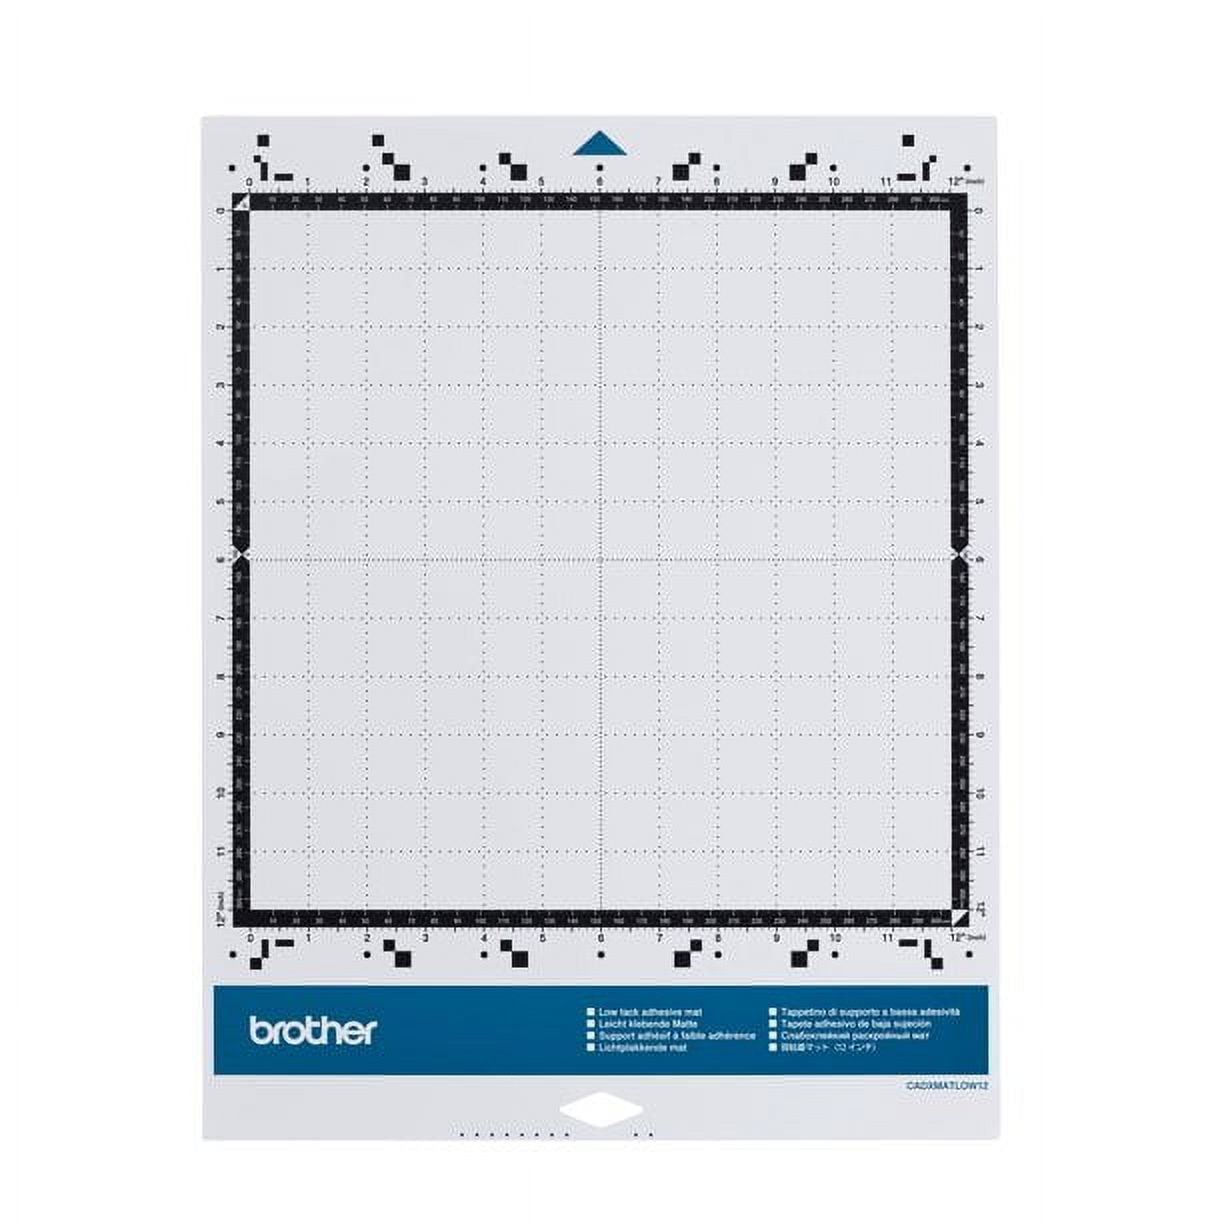 Brother Embossing Mat - 12 x 9.5